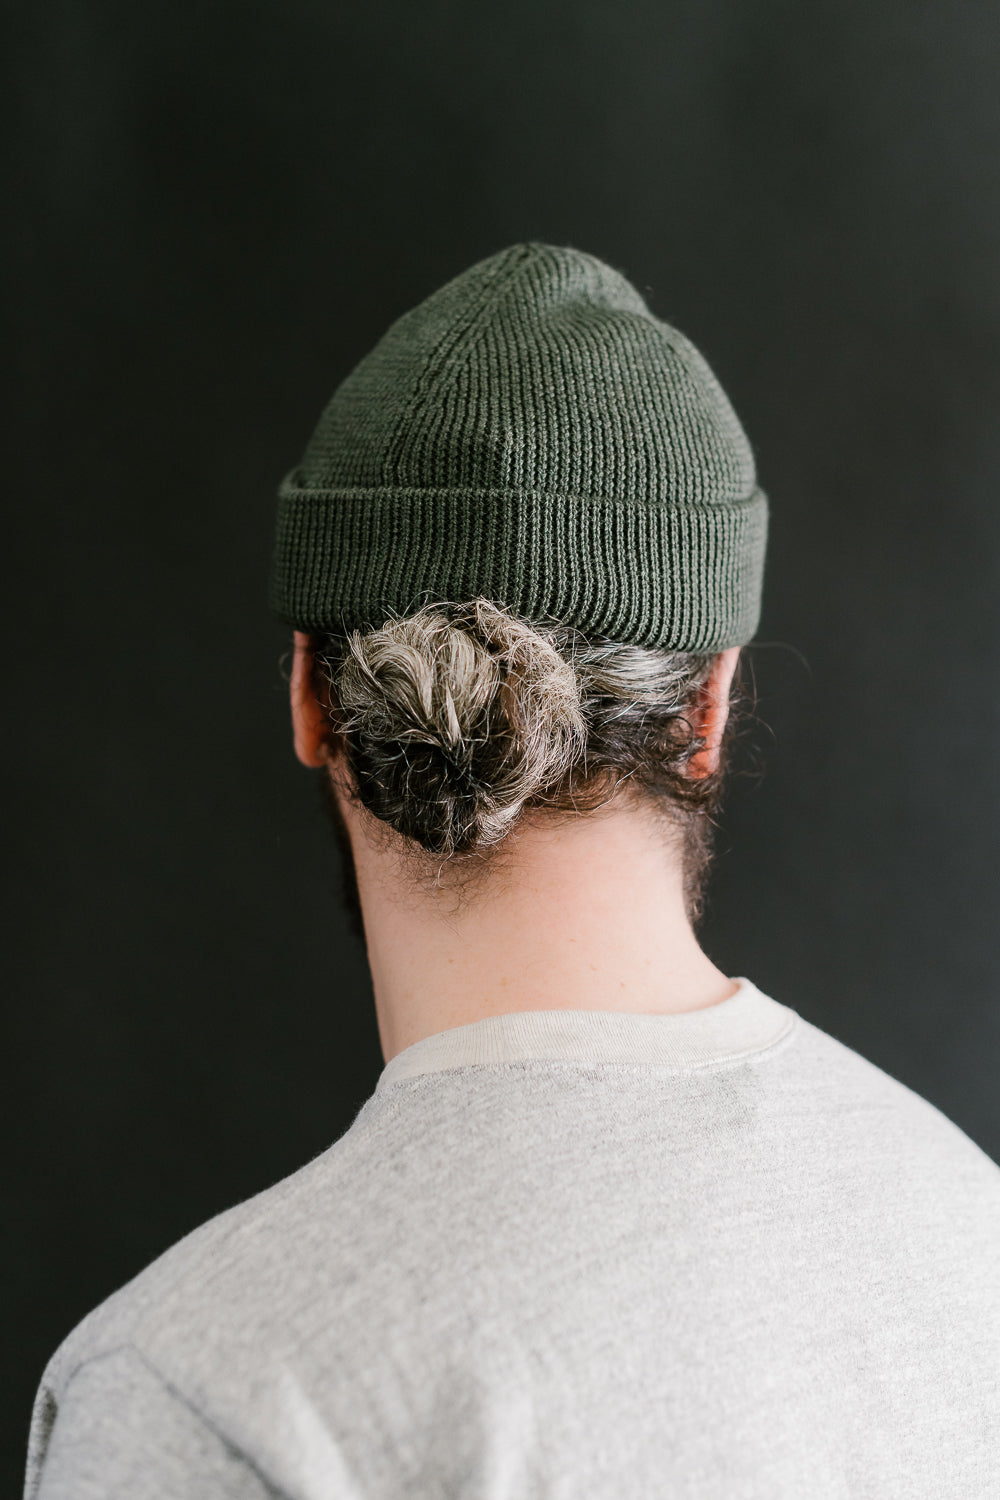 MWBN05.40 - Ribbed Structure Watch Cap Merino Wool - Army | James Dant